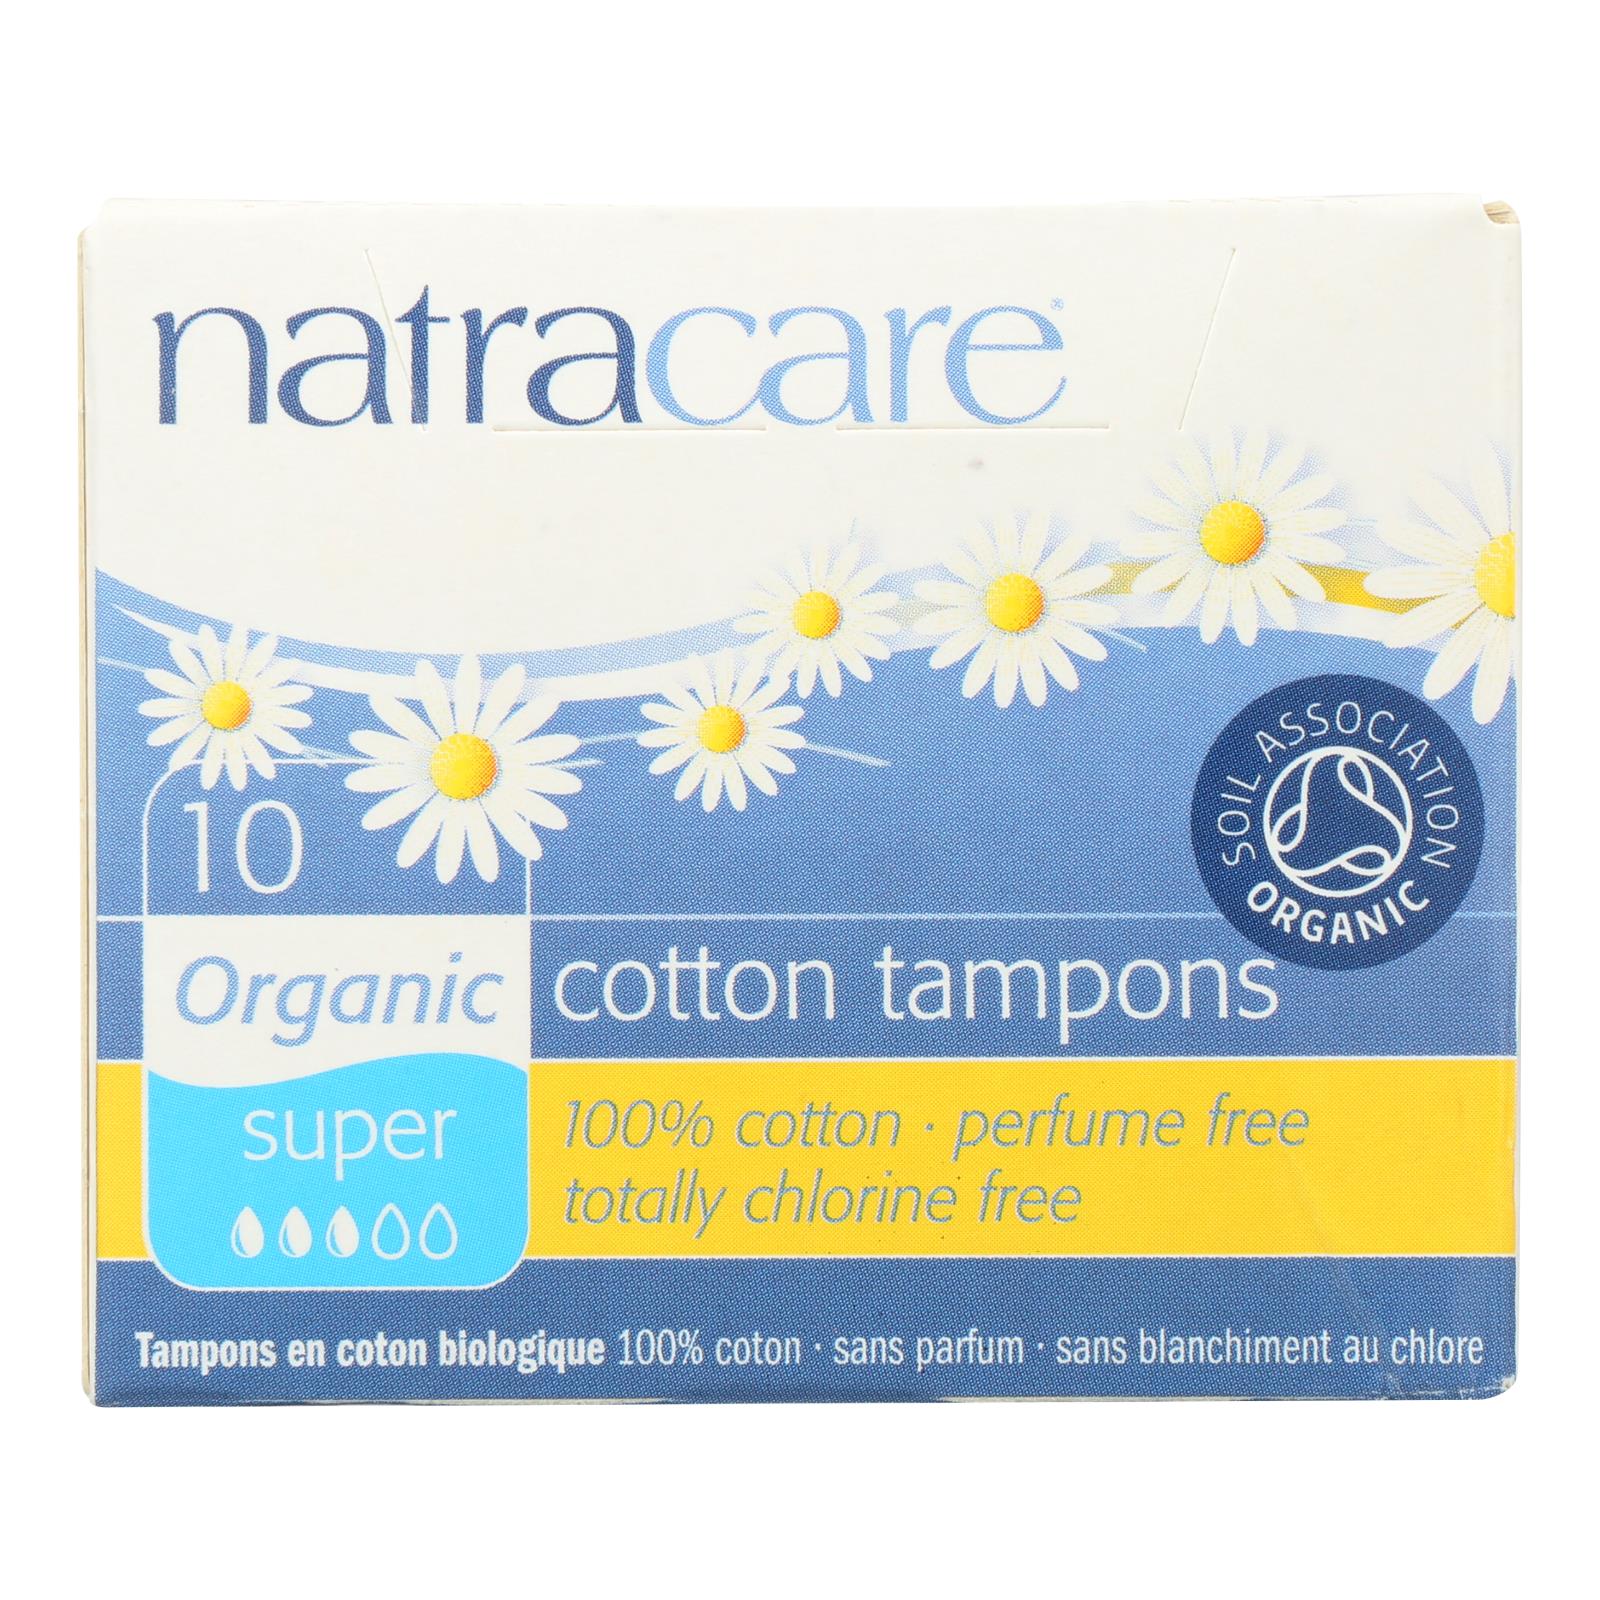 Natracare 100% Organic Cotton Tampons - Super - 10 Pack - Whole Green Foods